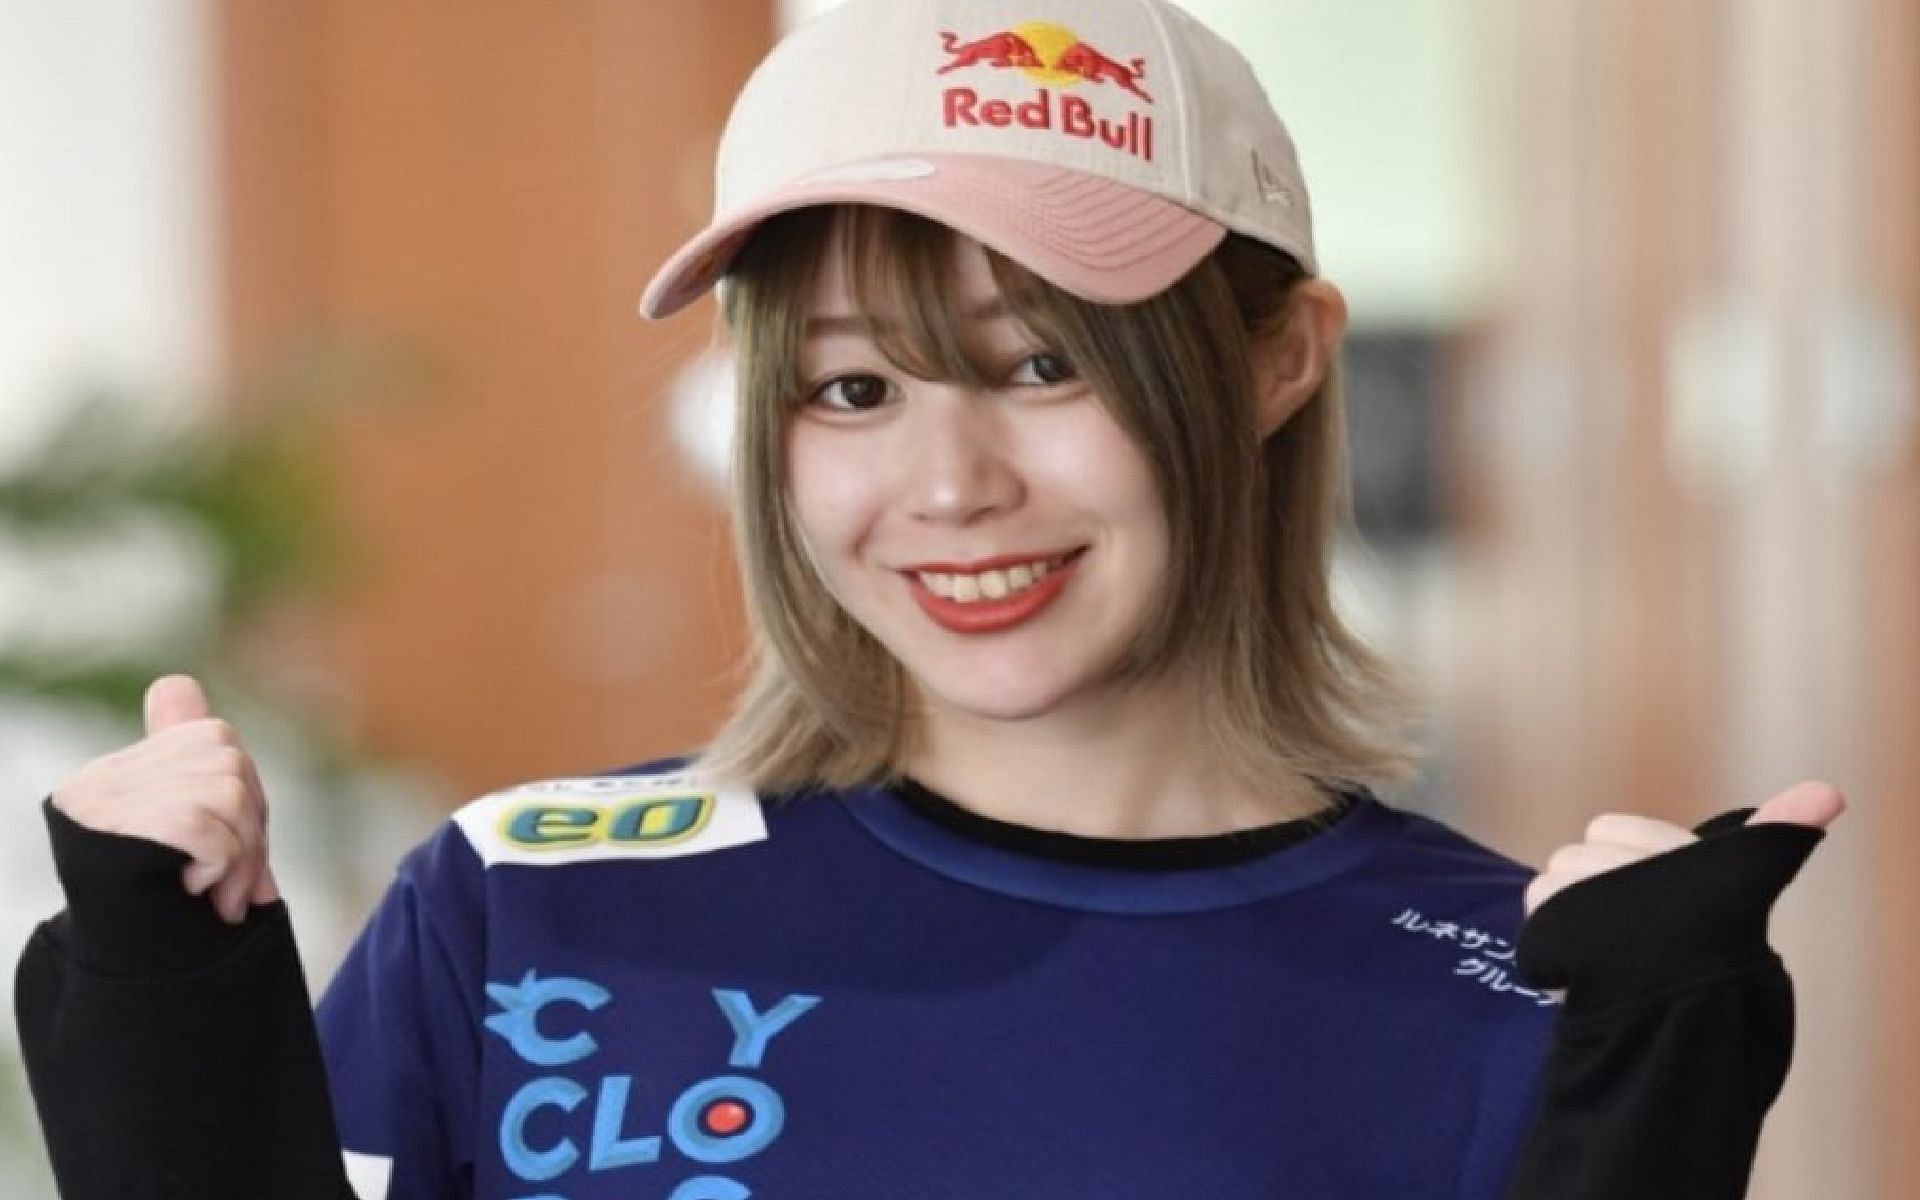 Tekken player gets kicked off from Cyclops Athlete Gaming after her toxic remarks go viral (Images via kana_xiao/Twitter)